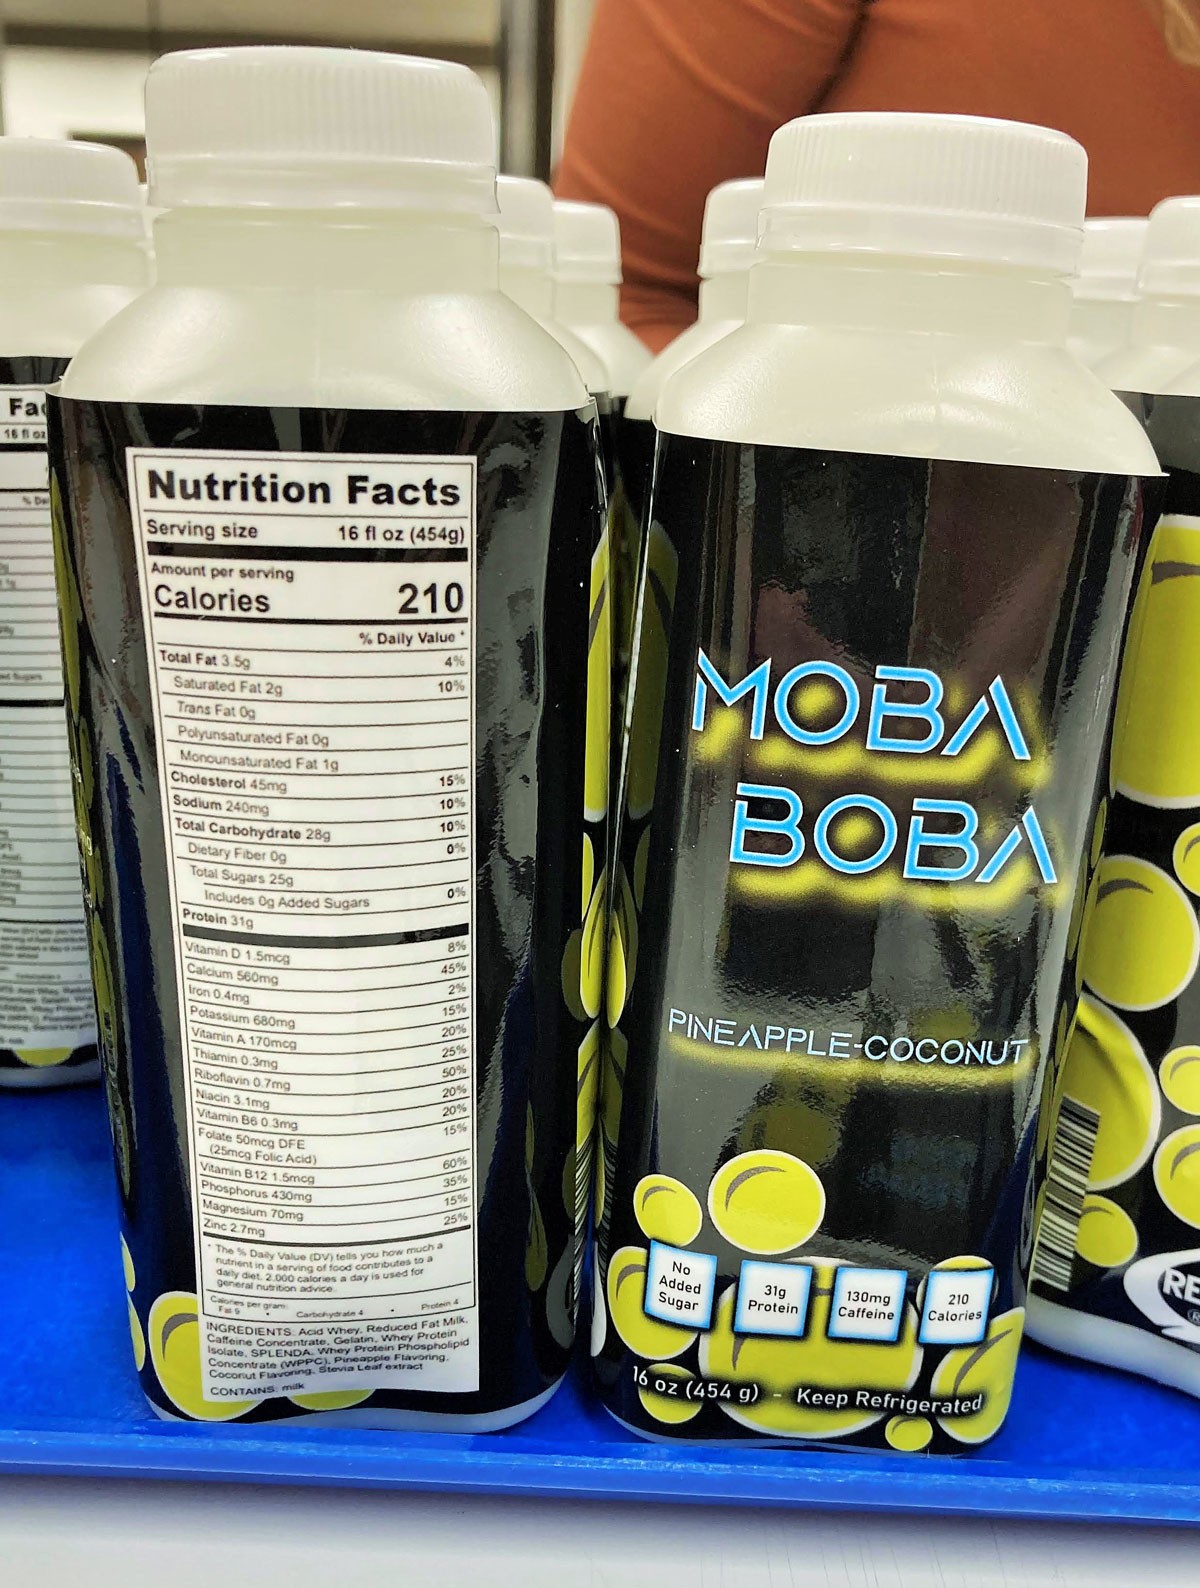 Bottles of MOBA Boba dairy energy drink for gamers.